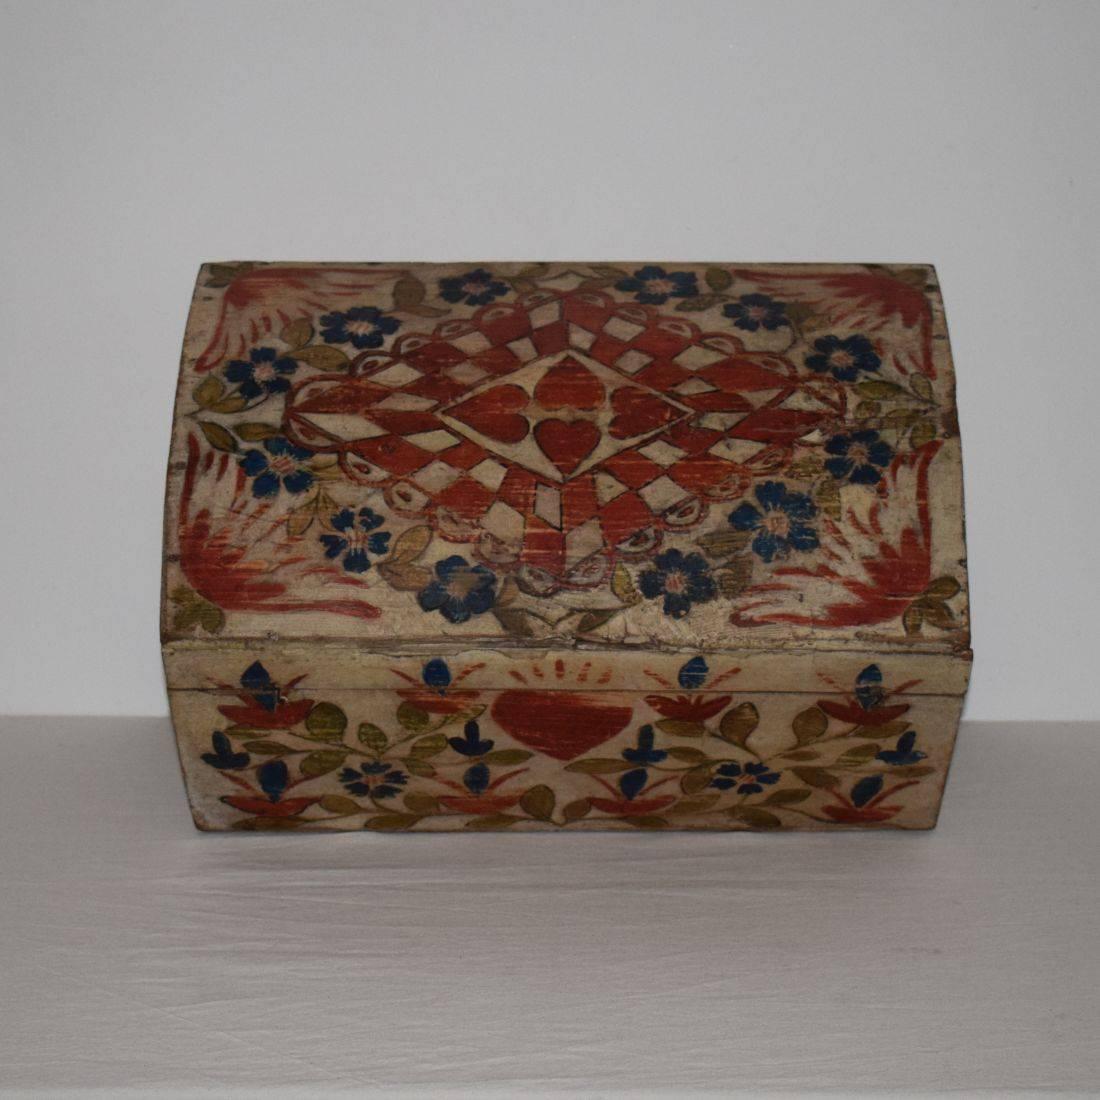 19th Century French Folk Art Weddingbox from Normandy with Hearts 1